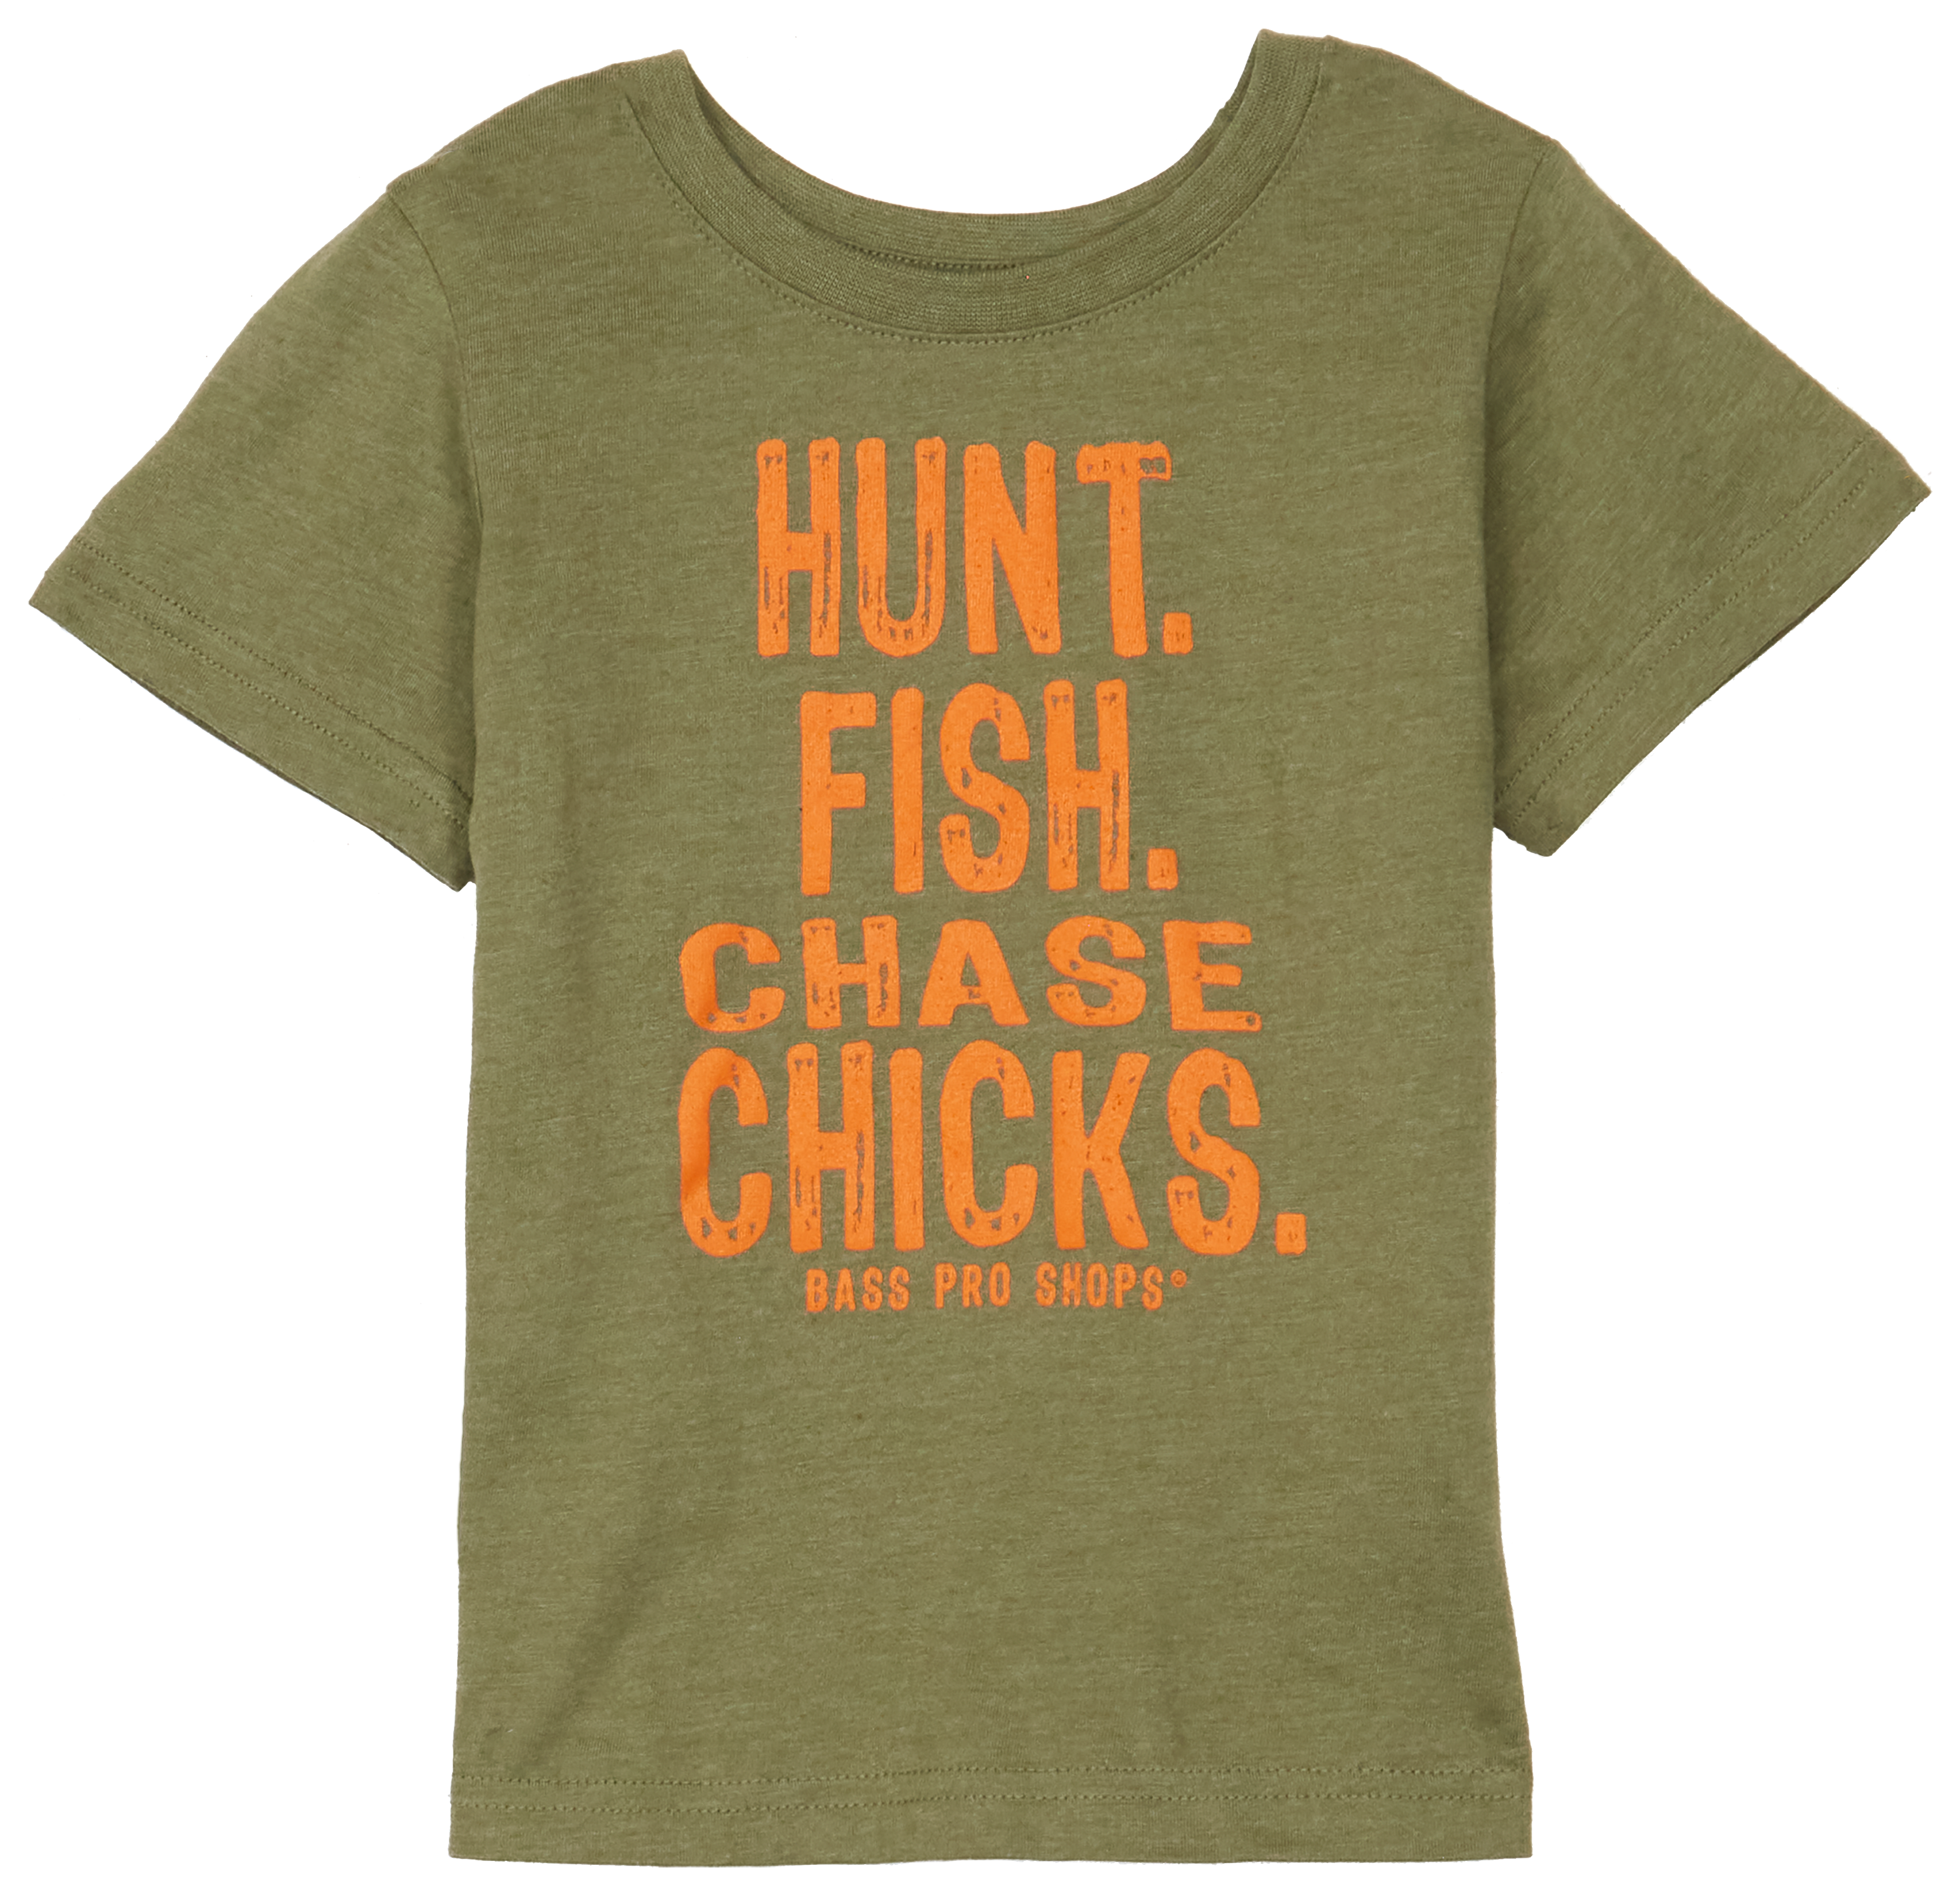 Bass Pro Shops Hunt Fish Chase Chicks Short-Sleeve T-Shirt for Toddlers - Olive - 4T